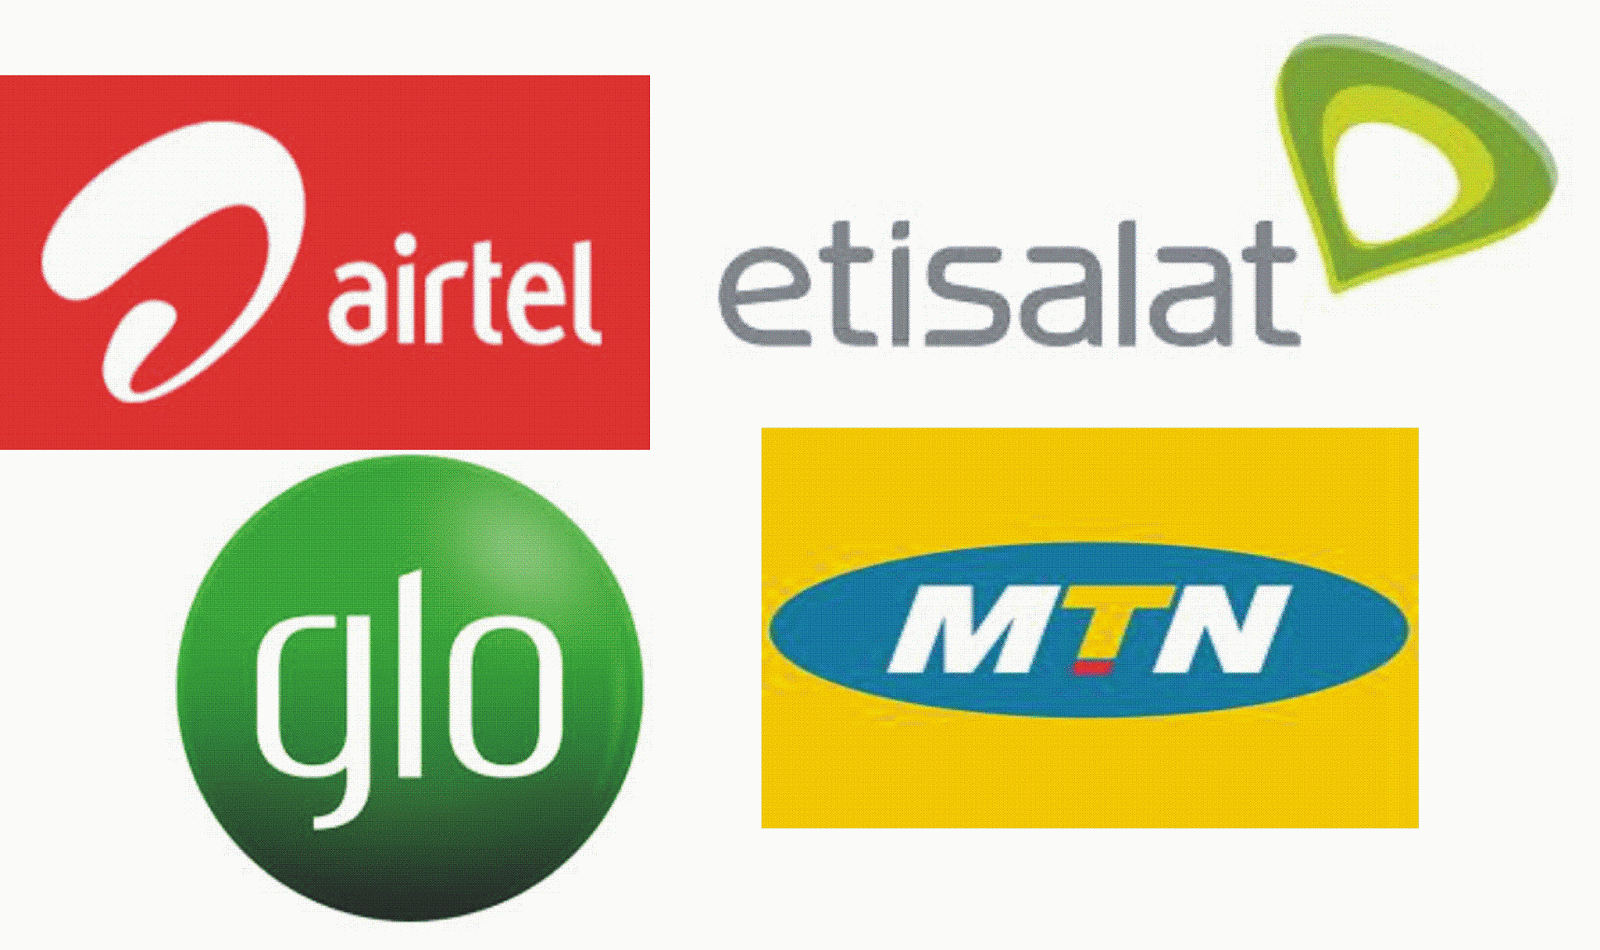 recharge card business in nigeria